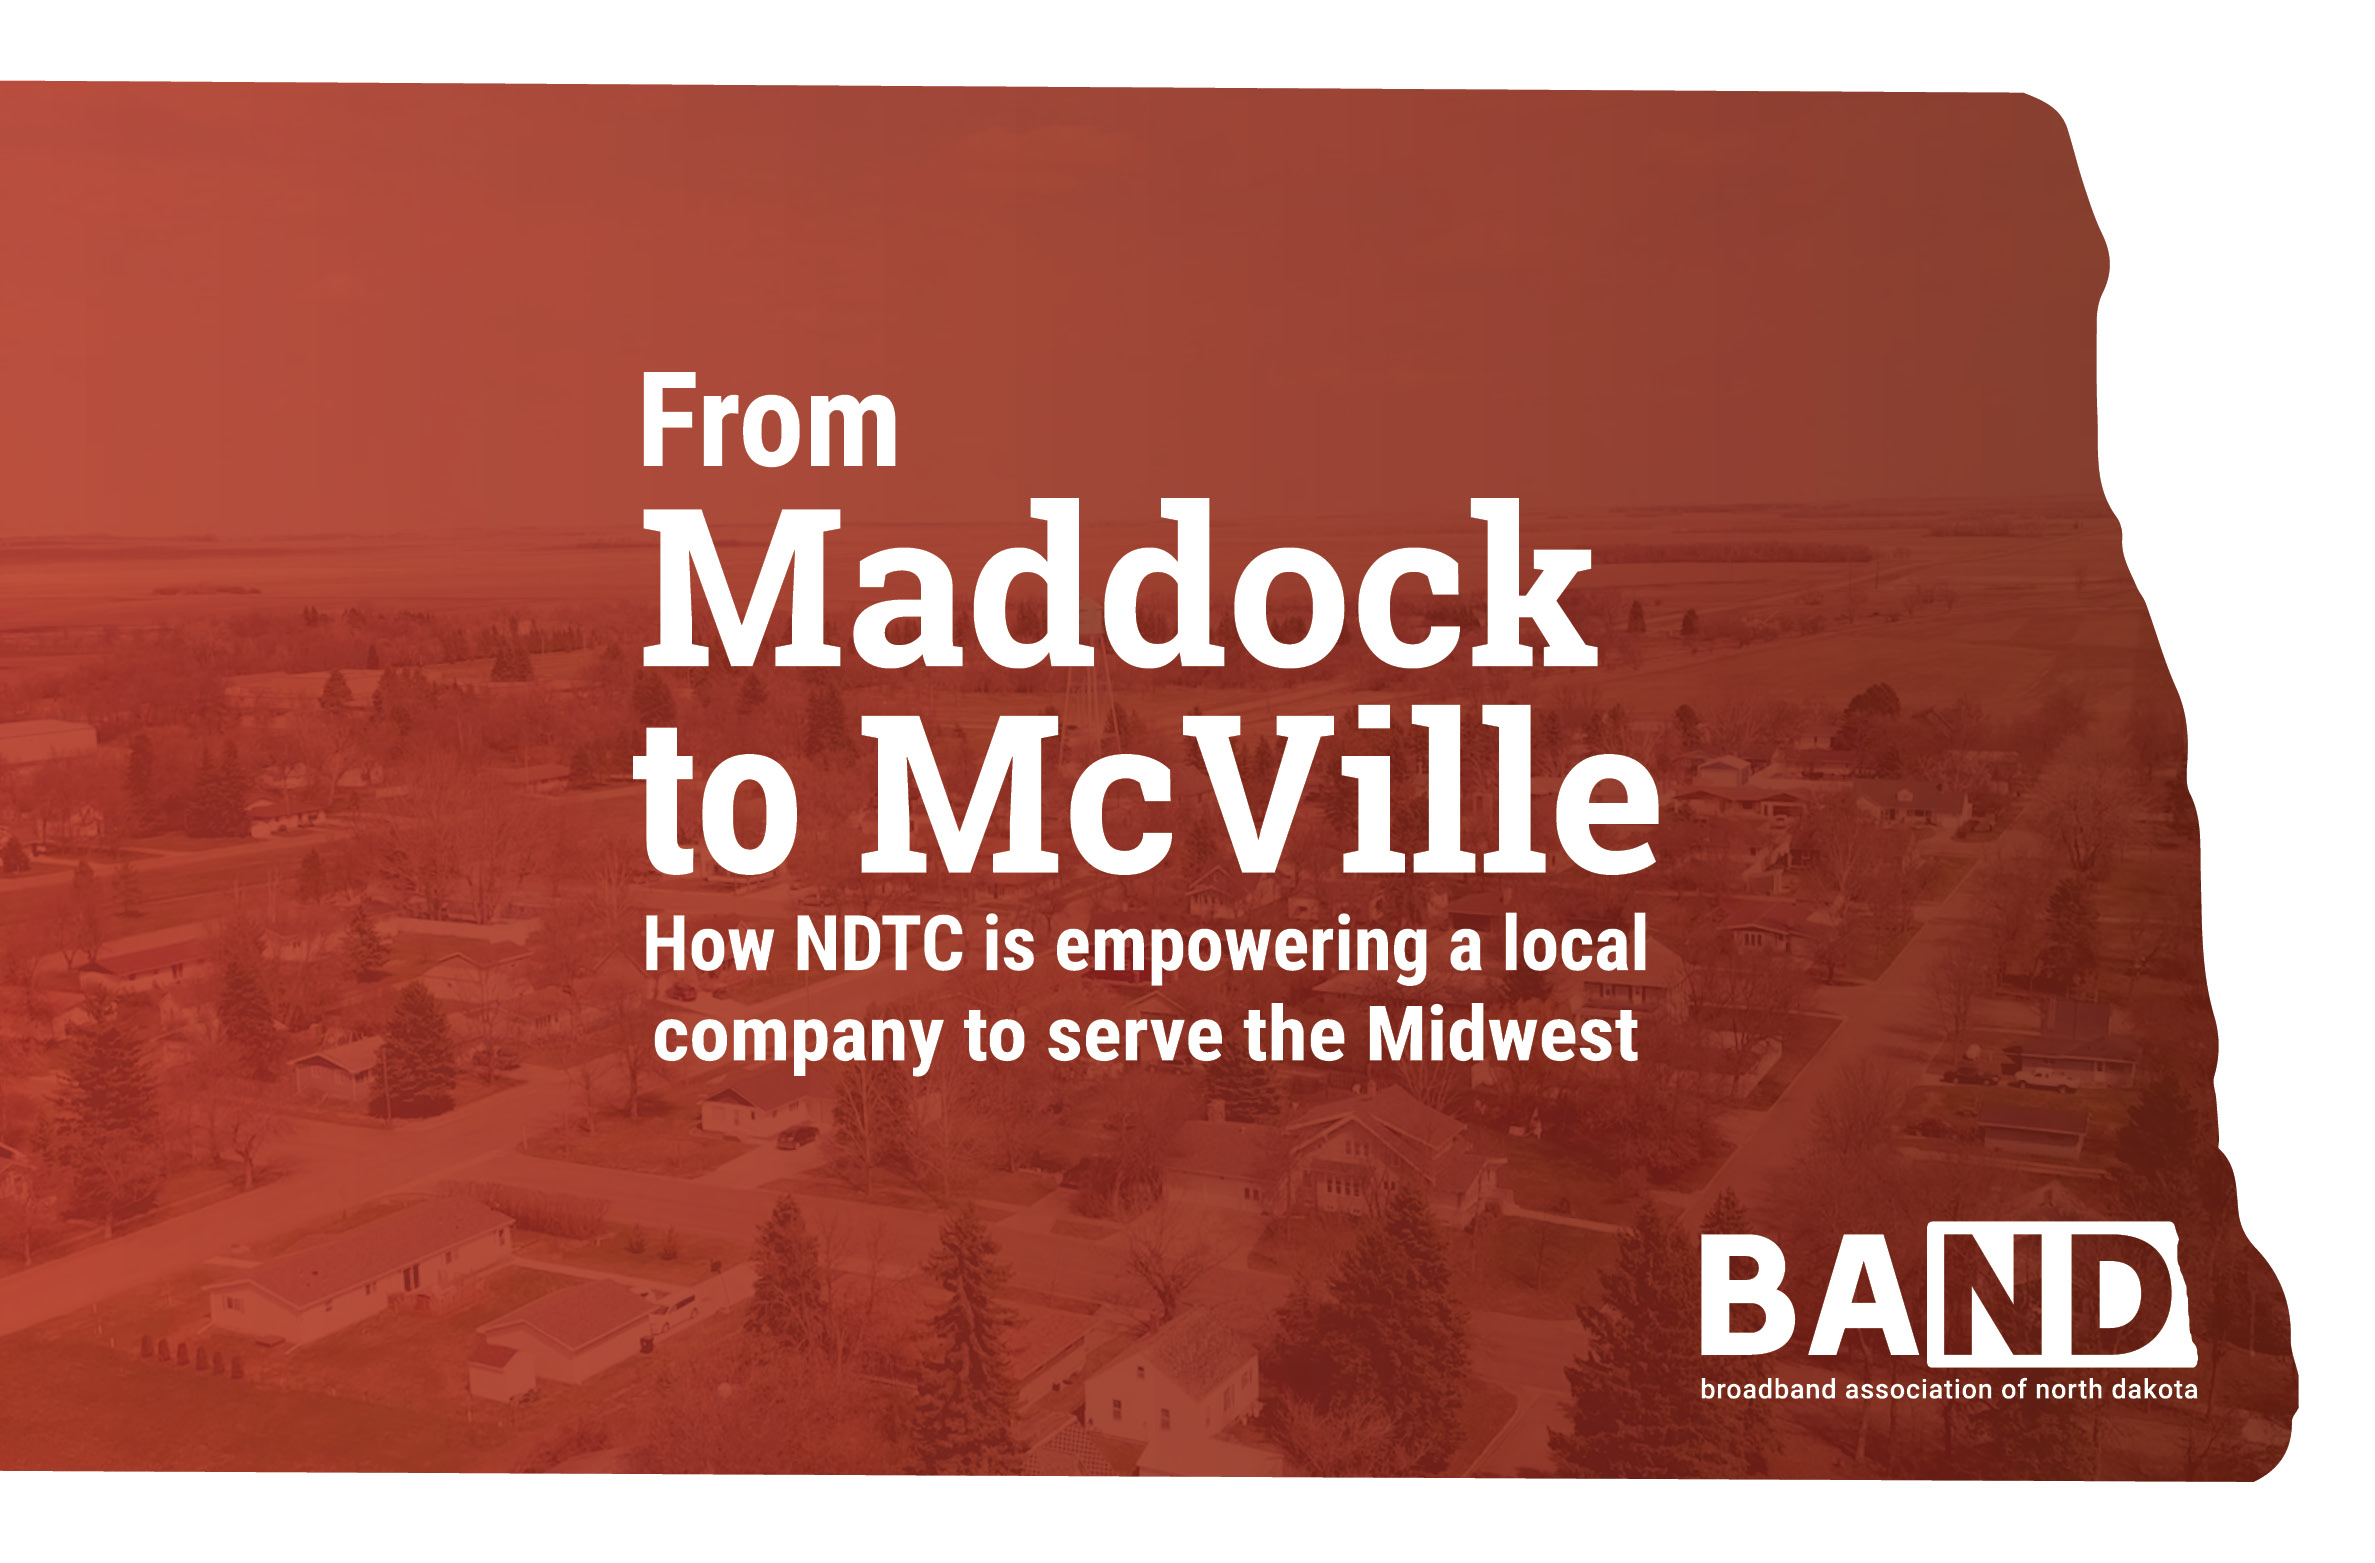 From maddock to McVille